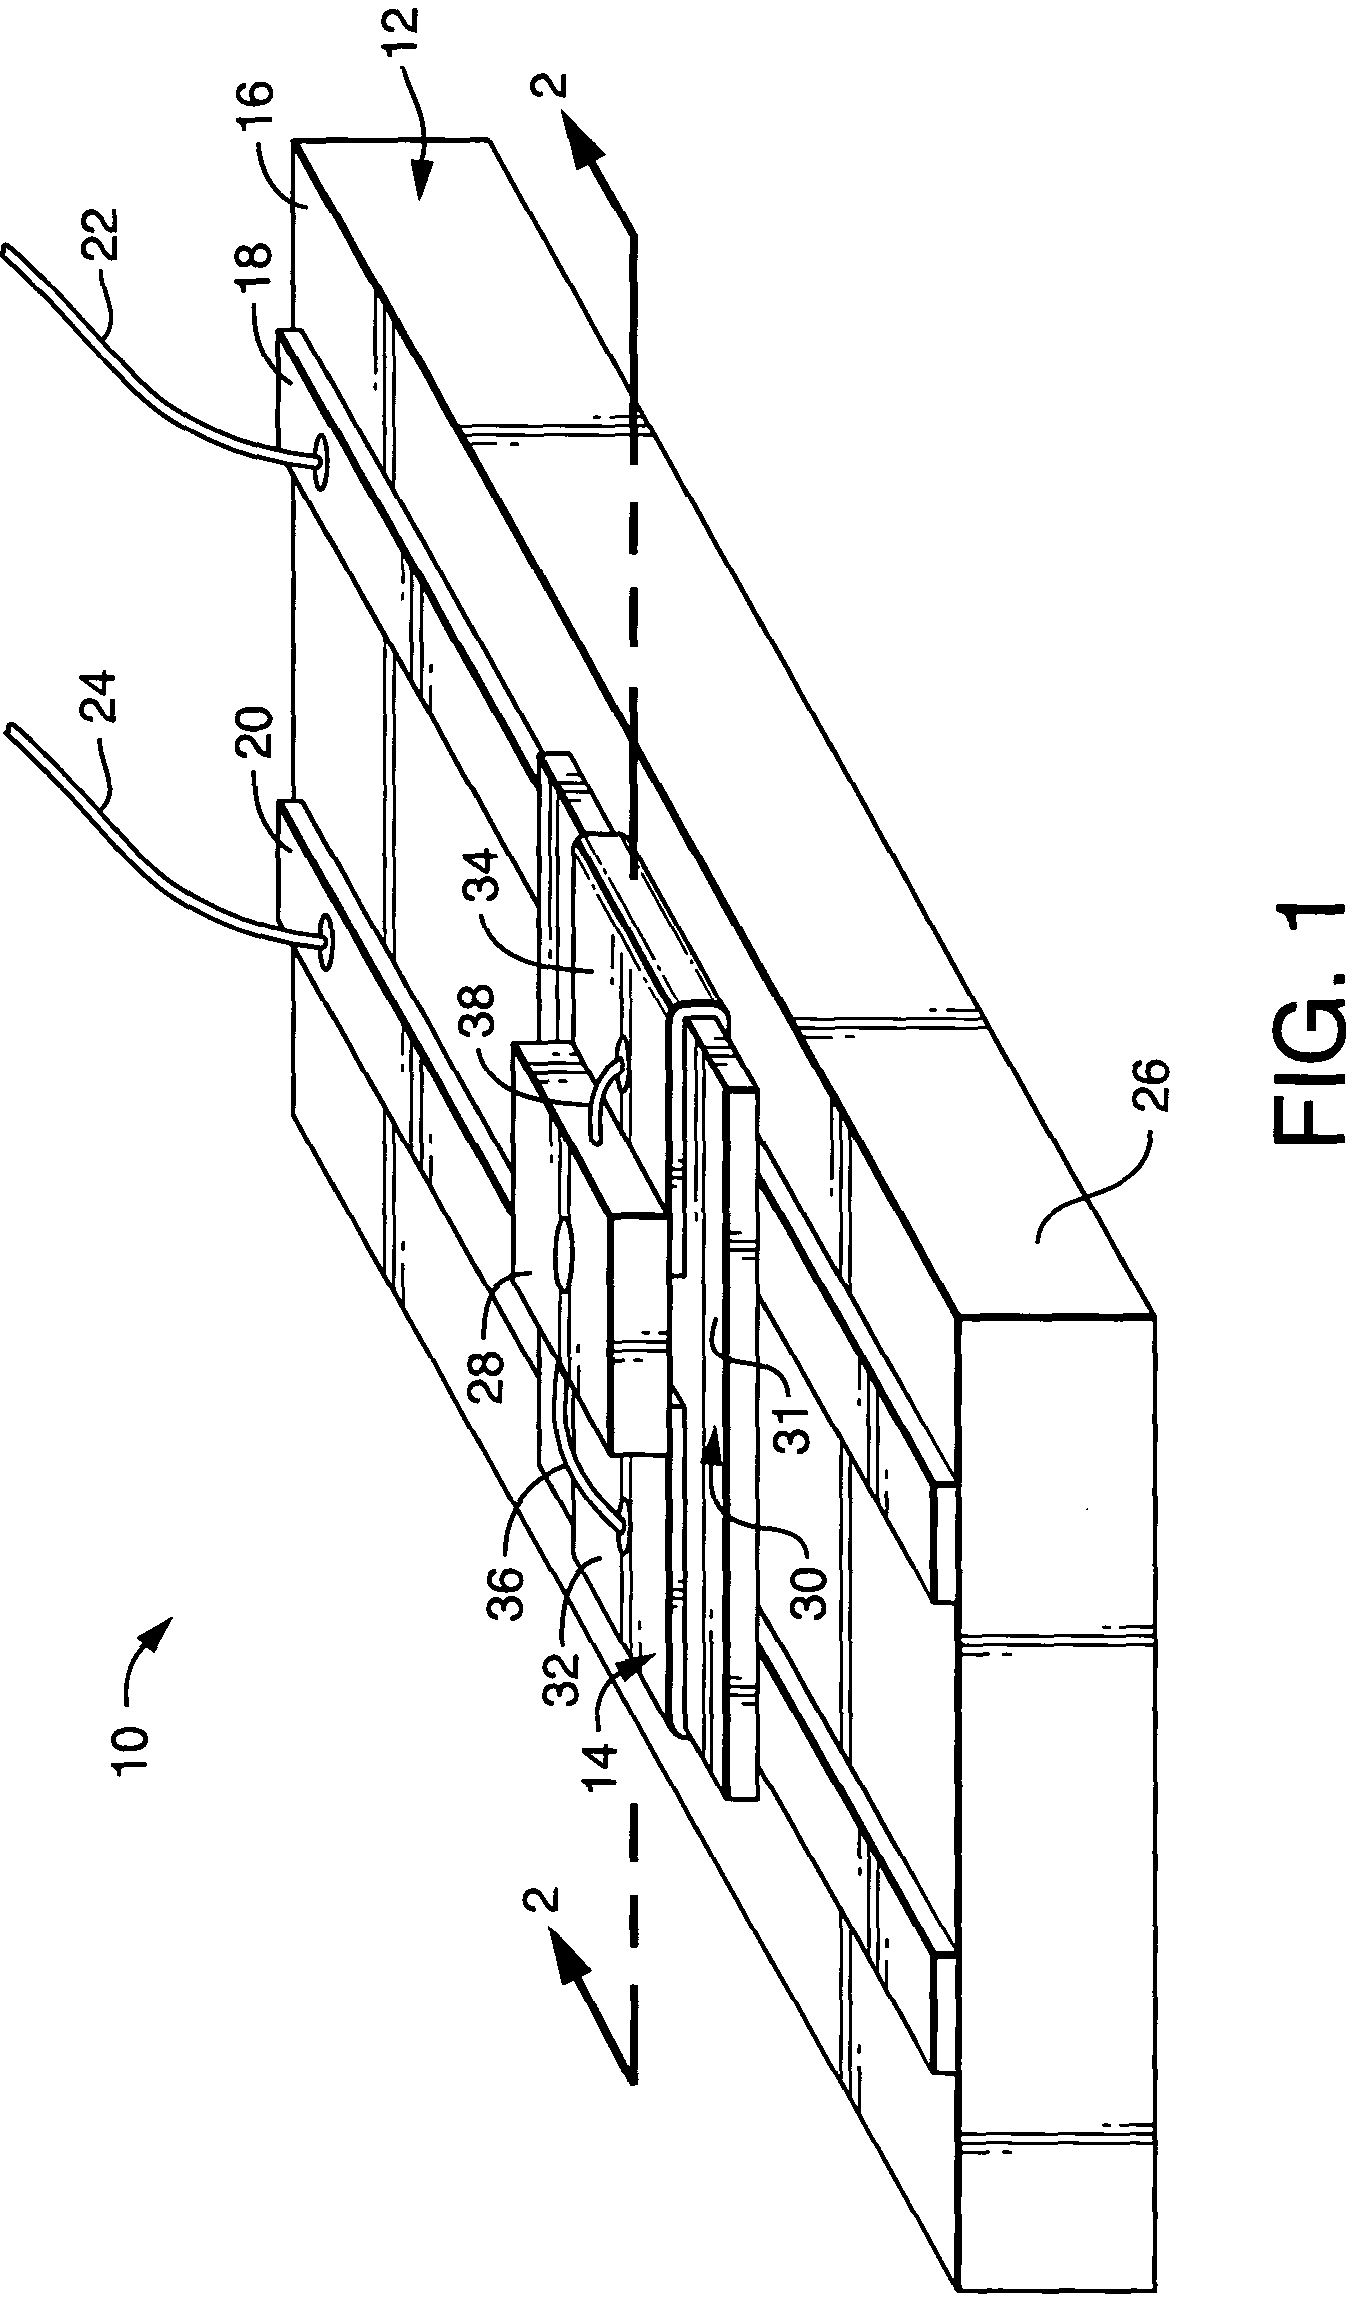 Lighting system with removable light modules